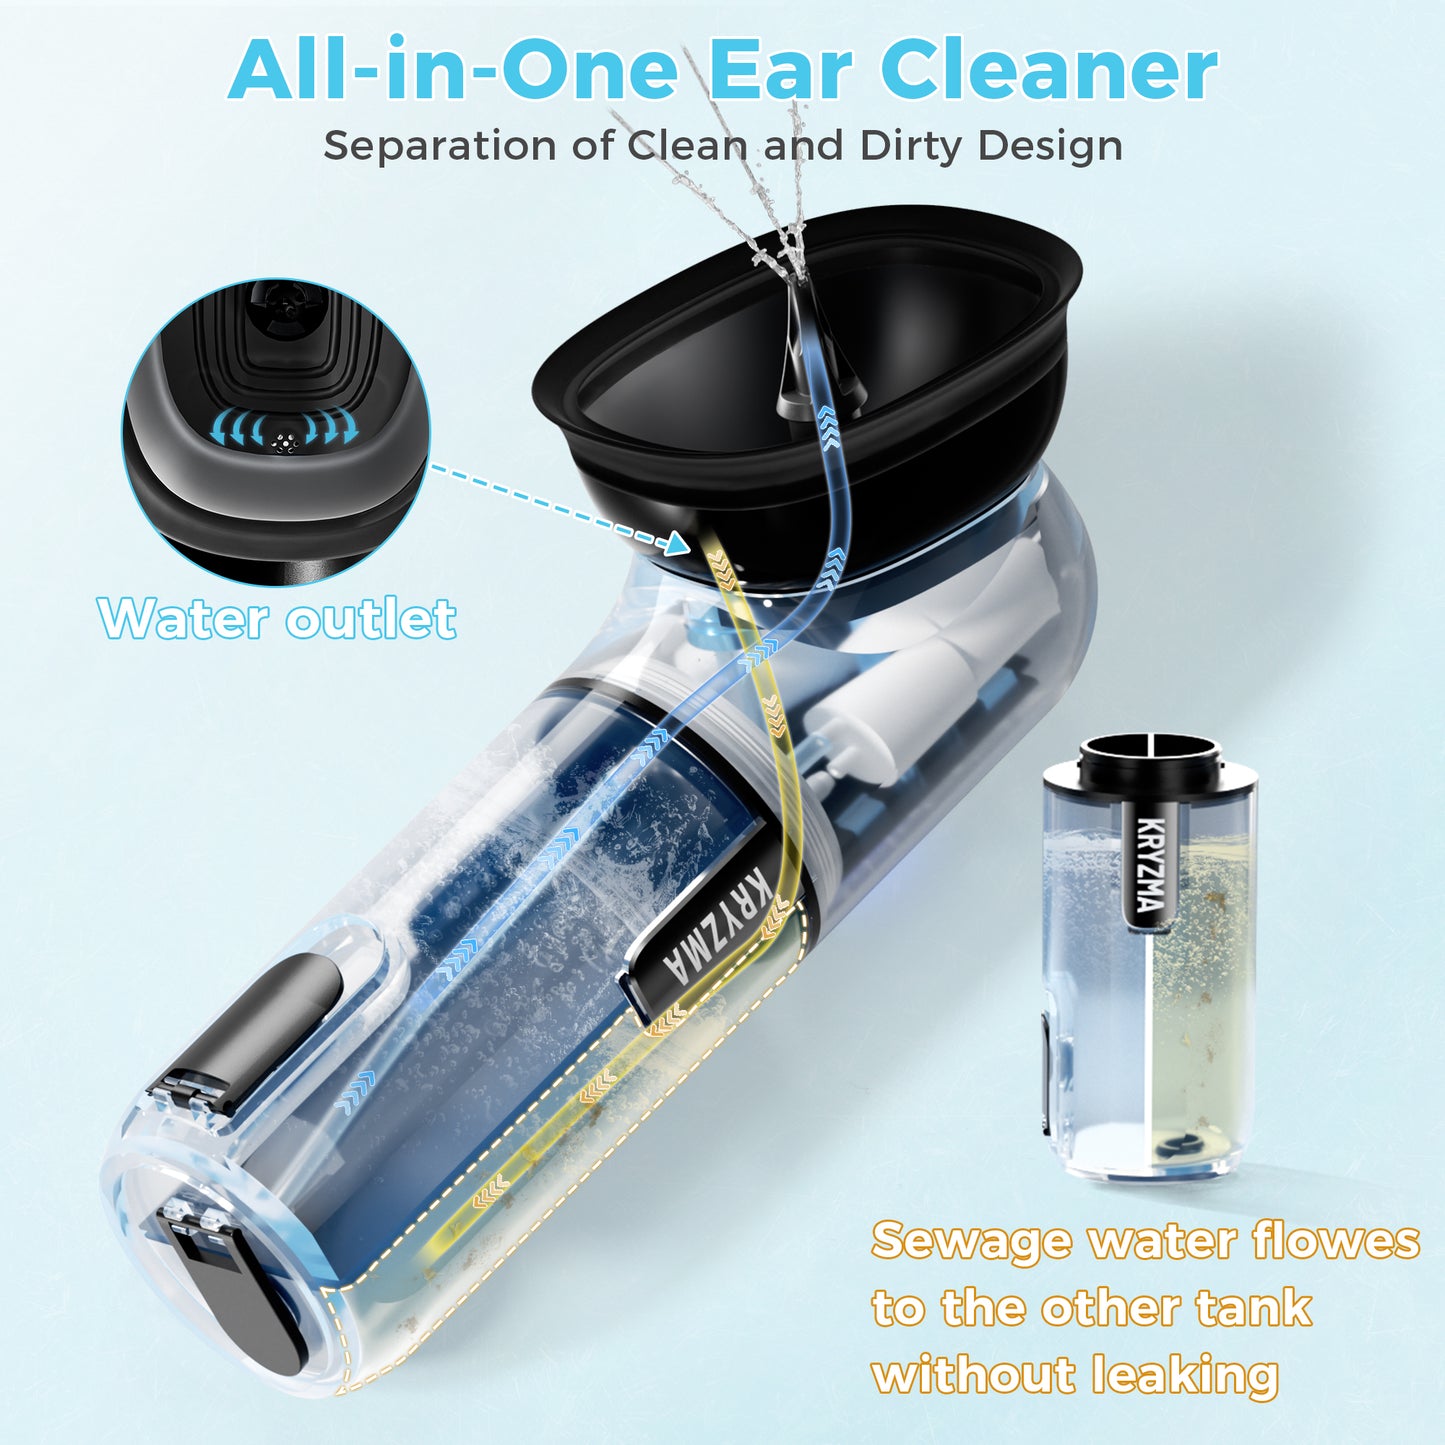 Ear Cleaning Kit - Kryzma Portable Electrical Ear Wax Removal Tool with 3 Pressure Level, USB Rechargeable, Water Resistant Include 6 Pcs Replacement Tips, Ear Basin, Suitable for Home, Bathroom and Travel